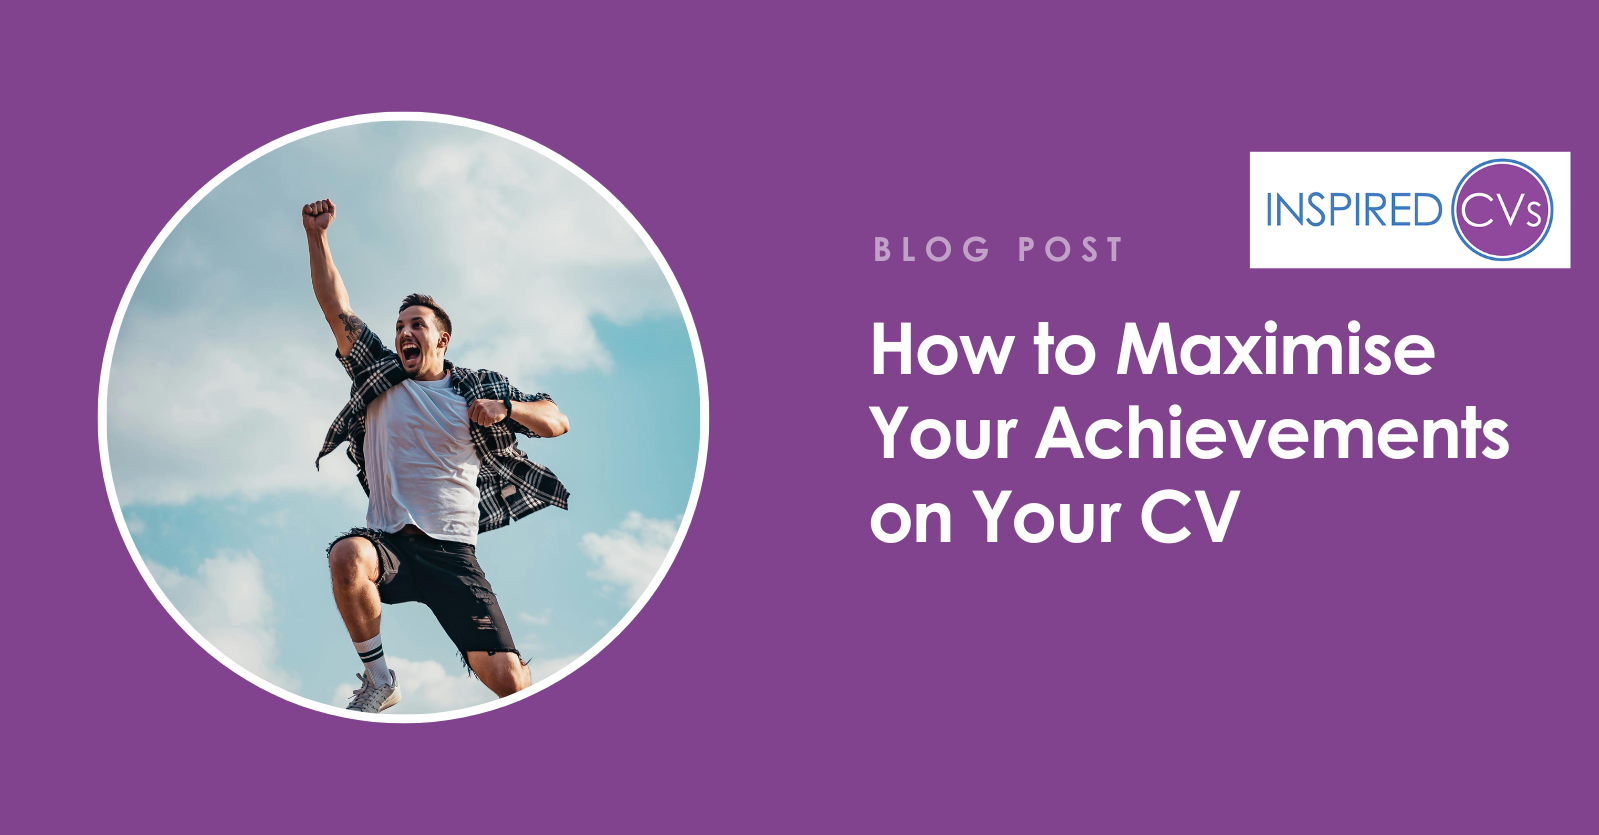 How to Maximise Your Achievements on Your CV